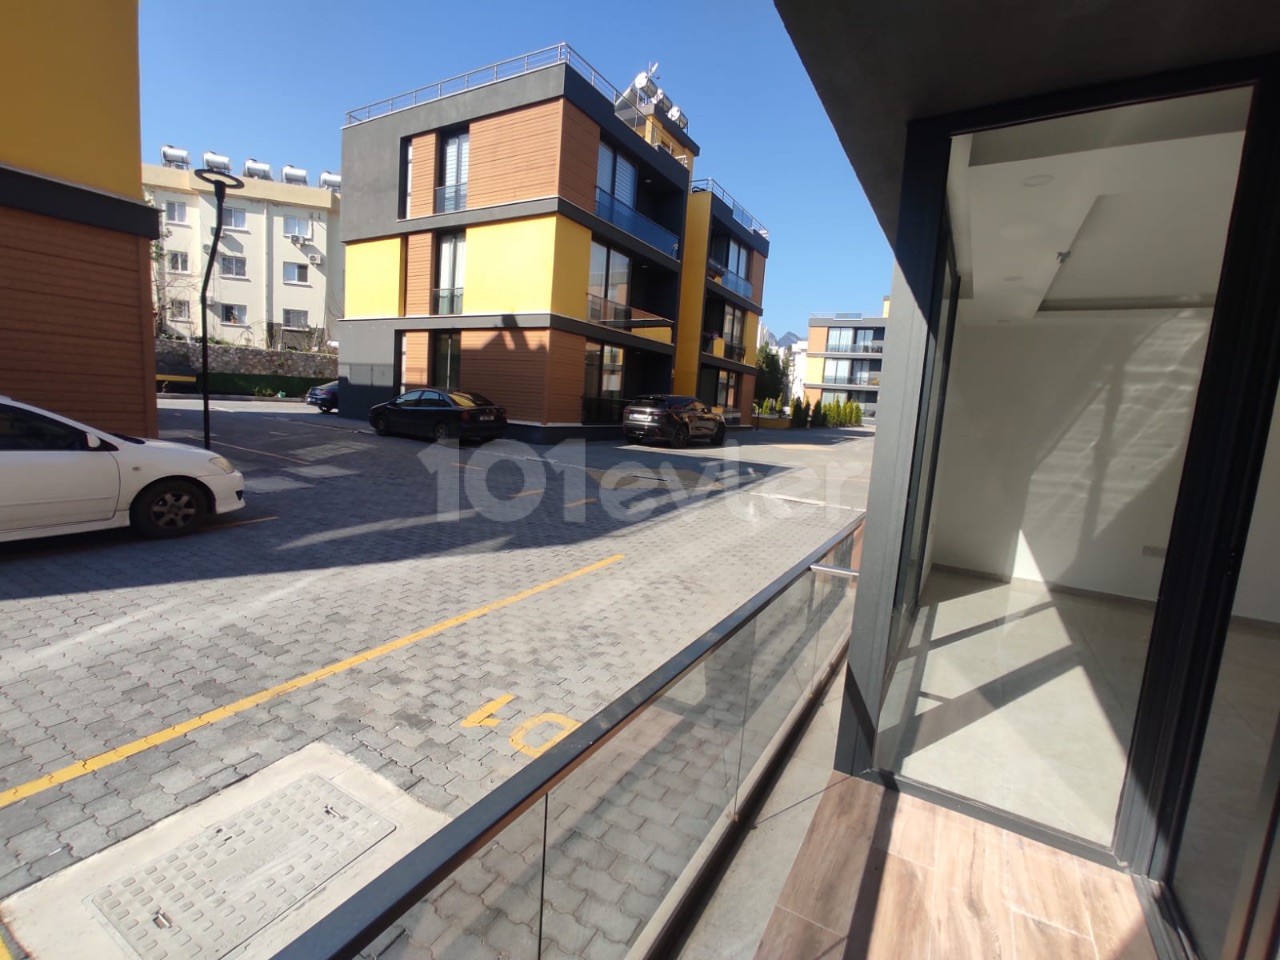 NEW 2+1 flat for sale in Alsancak in beautiful site with swimming pool